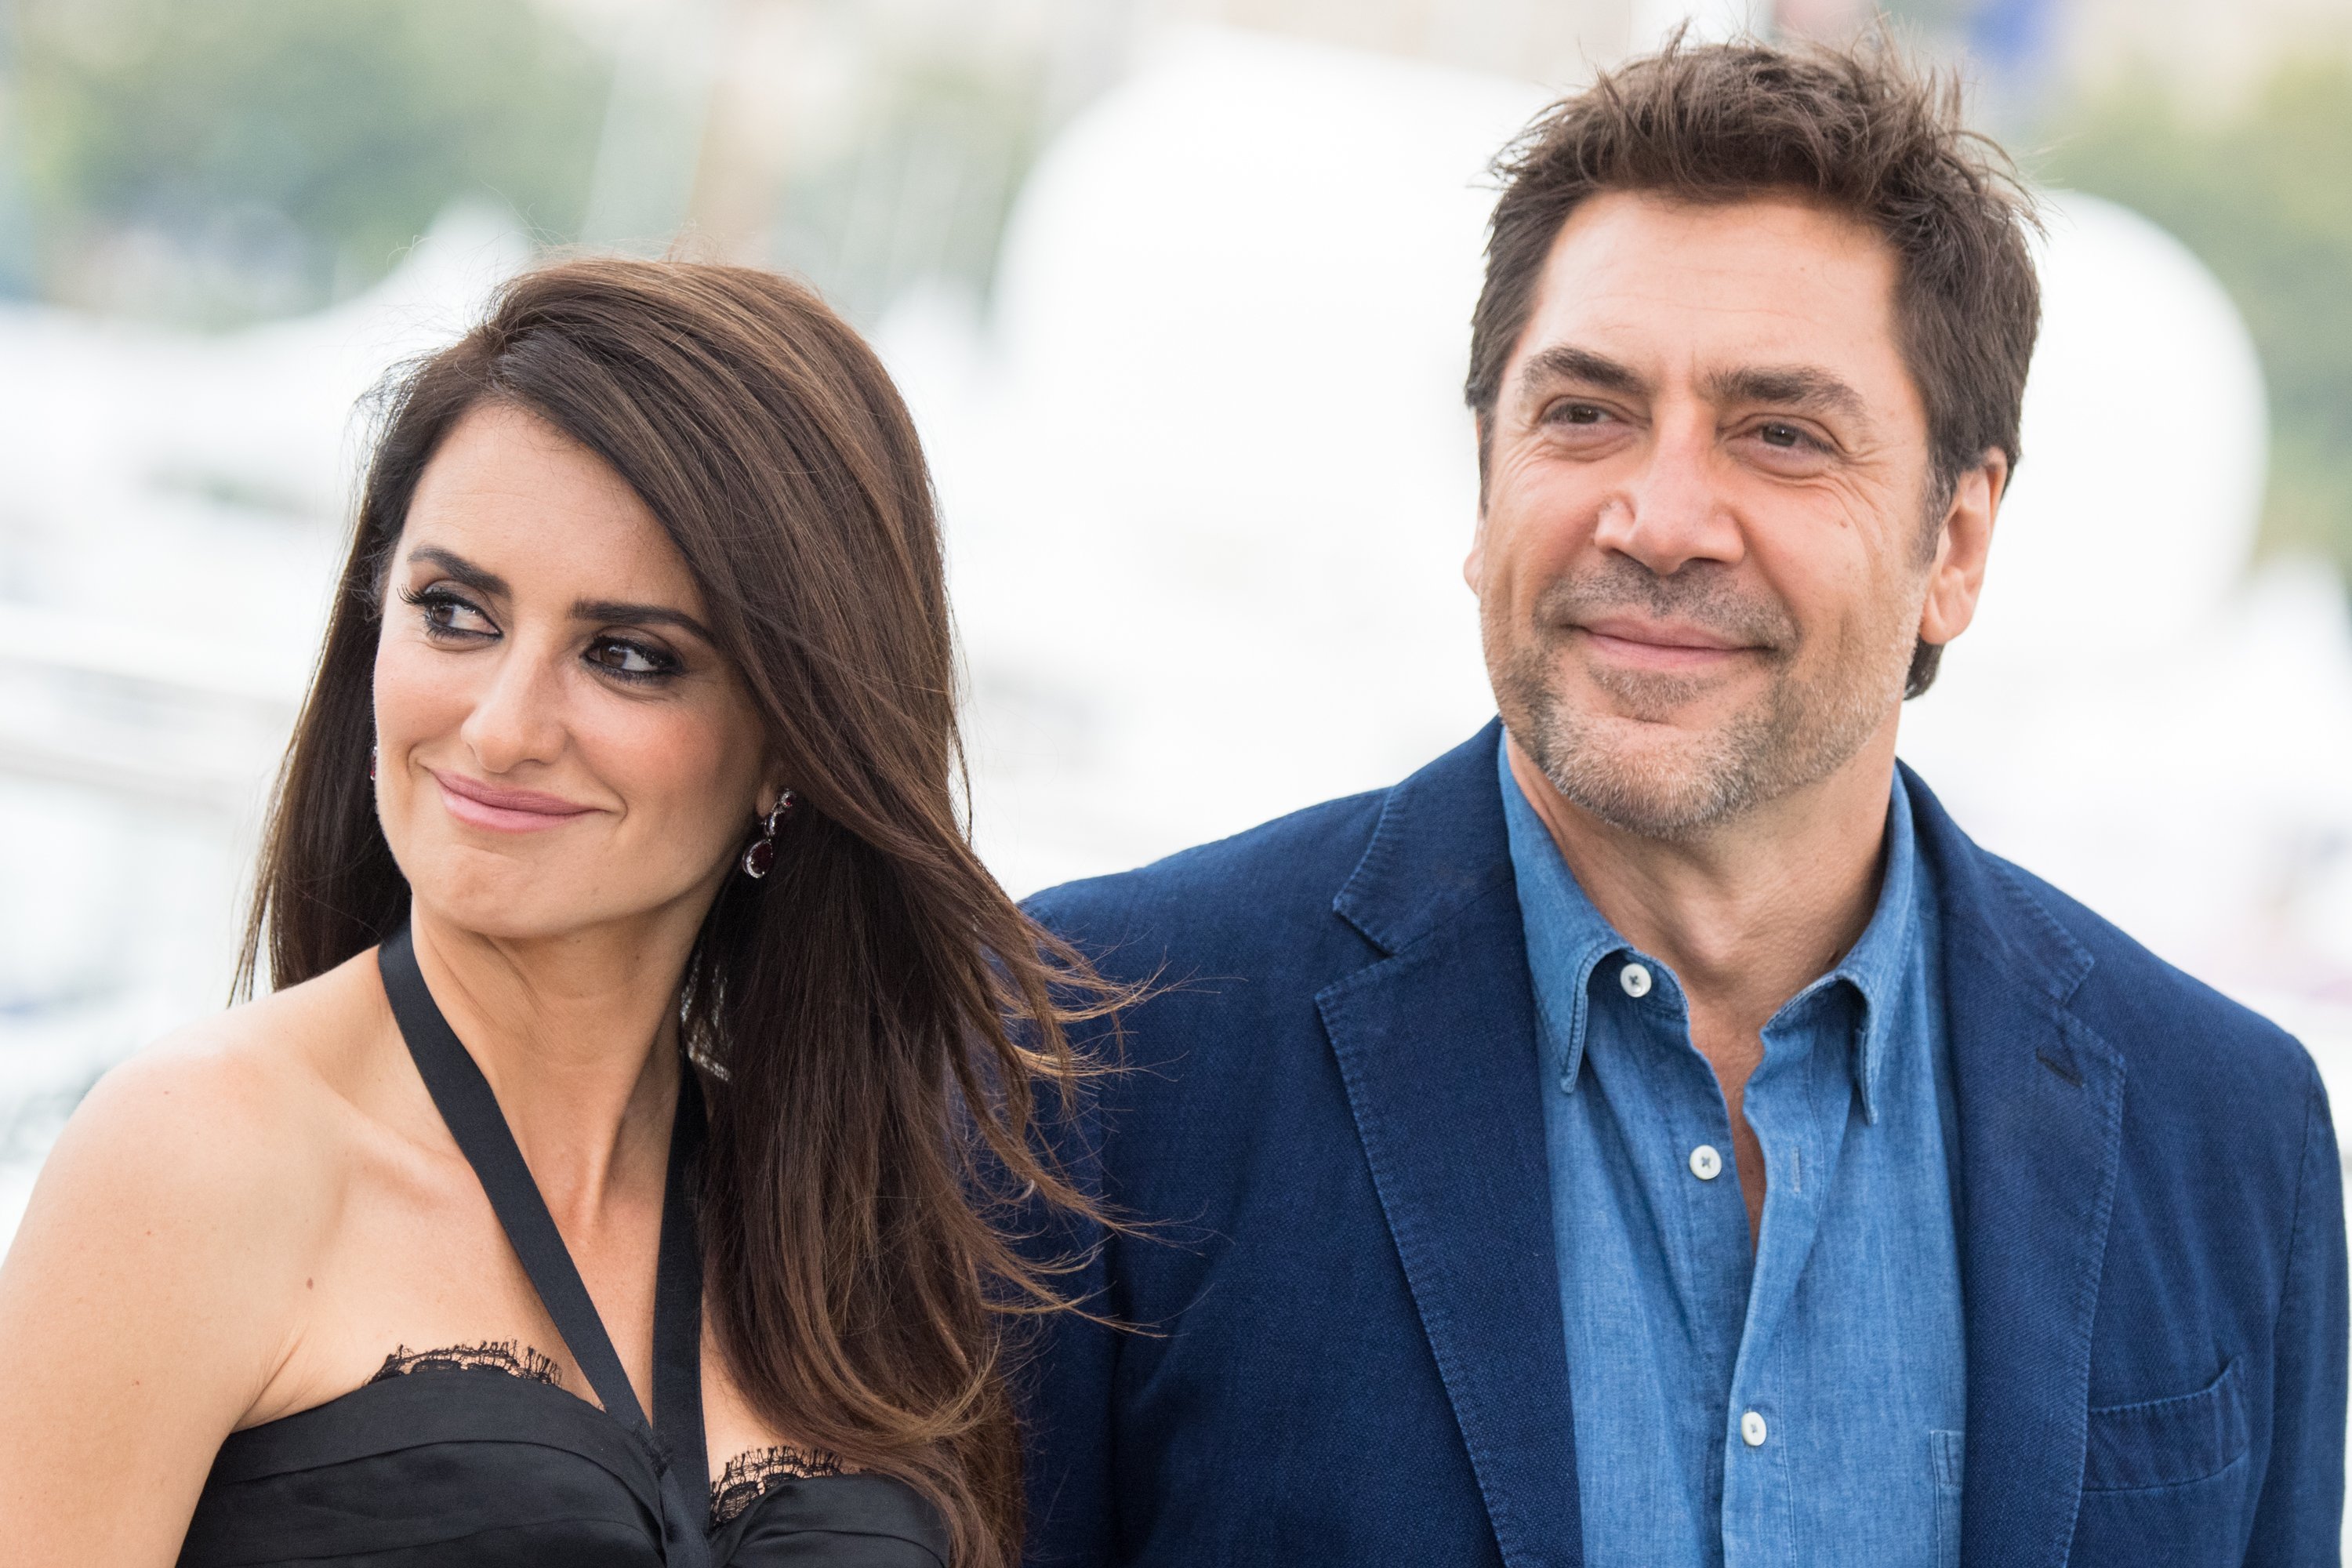 Actress Penelope Cruz, wearing jewels by Atelier Swarovski Fine Jewelry, and Javier Bardem attend the photocall for "Everybody Knows (Todos Lo Saben)" during the 71st annual Cannes Film Festival at Palais des Festivals on May 9, 2018 in Cannes, France.  | Source: Getty images